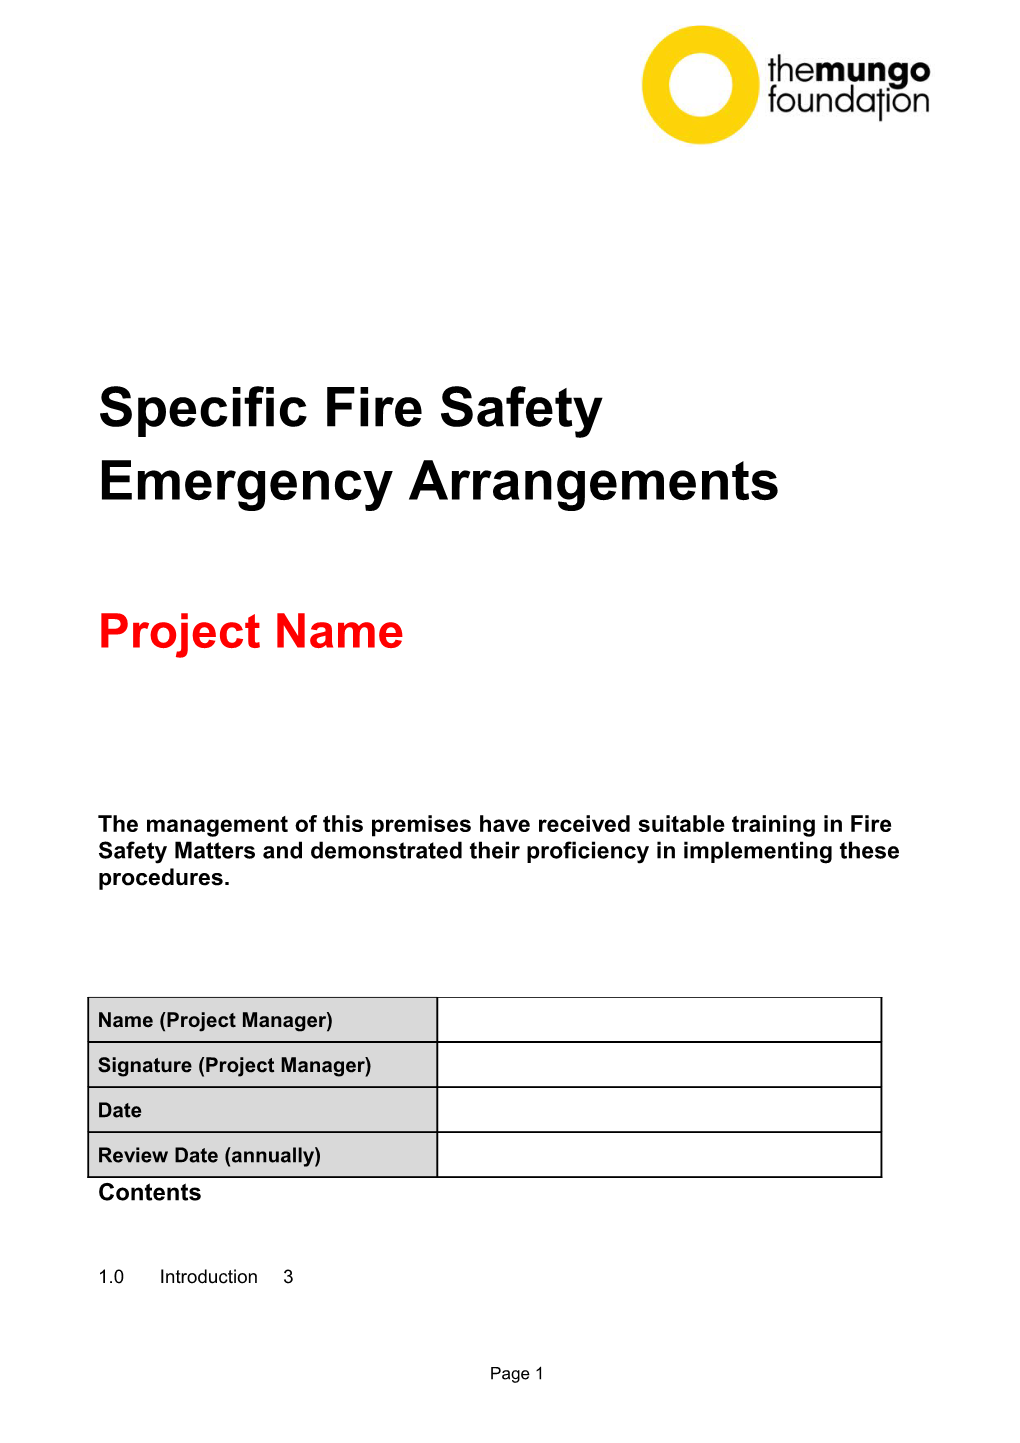 Specific Fire Safety